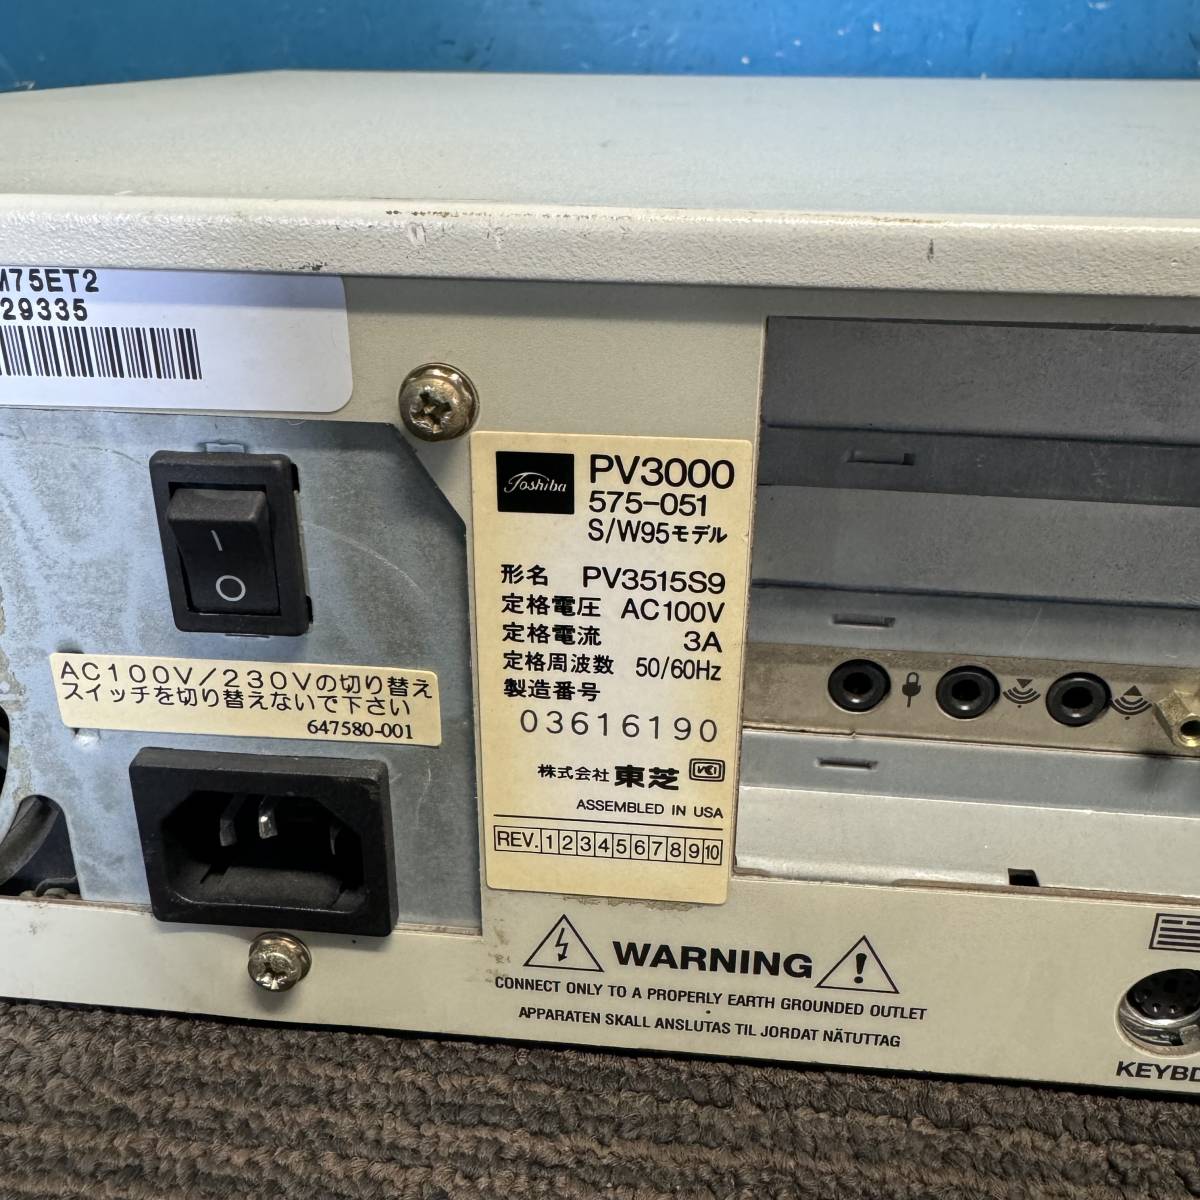 * Gifu departure ^TOSHIBA/PV3000/575-051/ desk top /S/W95 model / personal computer / electrification only verification / parts taking / front cover lack of / junk R5.12/11*